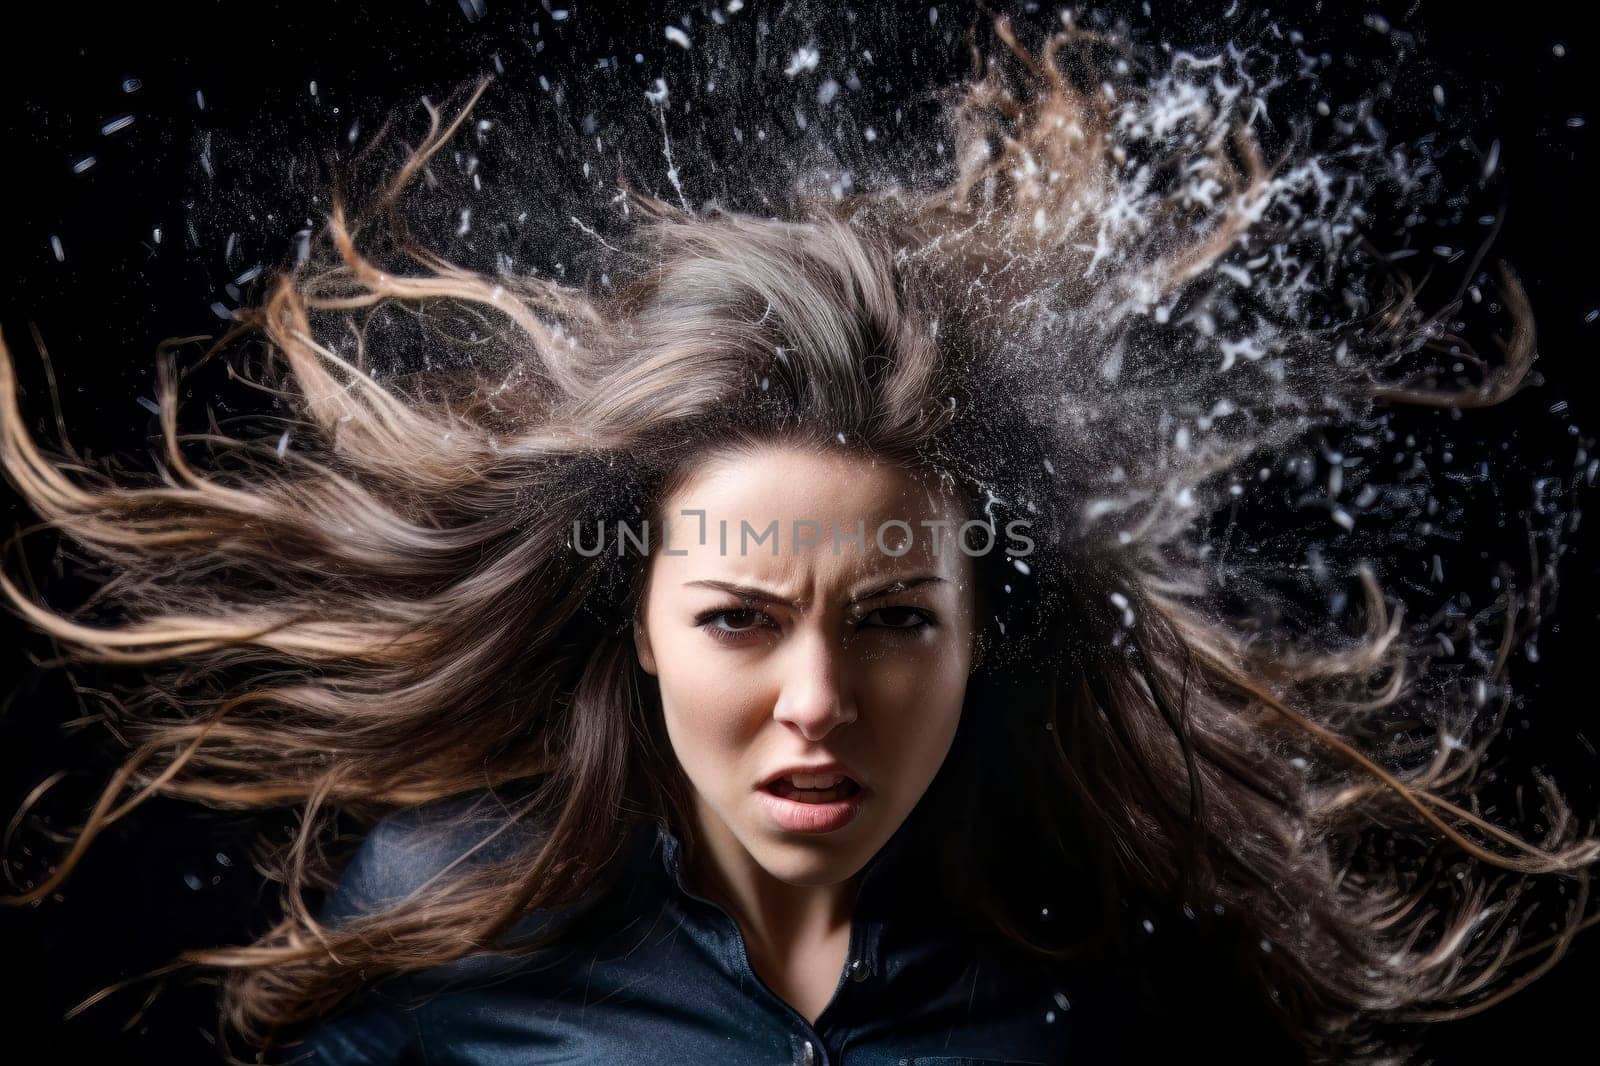 A captivating image capturing the intense emotion of an angry girl with her hair flying in the wind